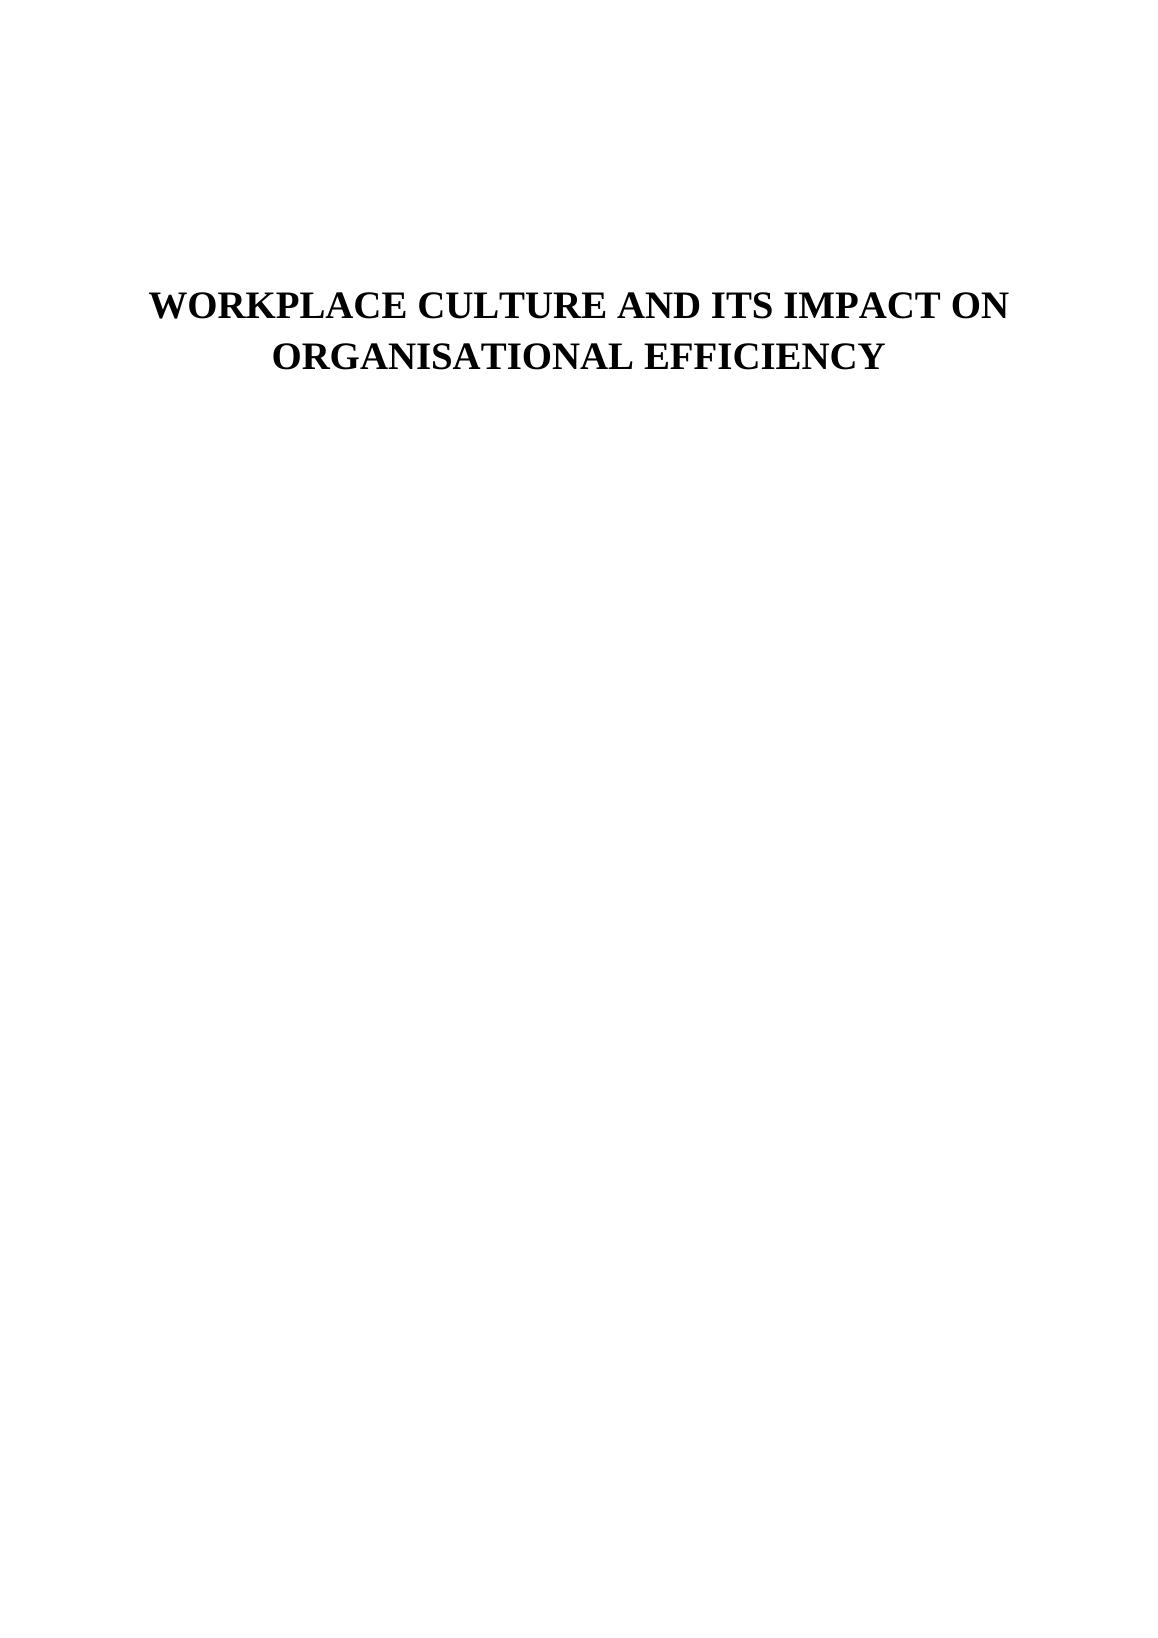 Workplace Culture and its Impact on Organisational Efficiency_1